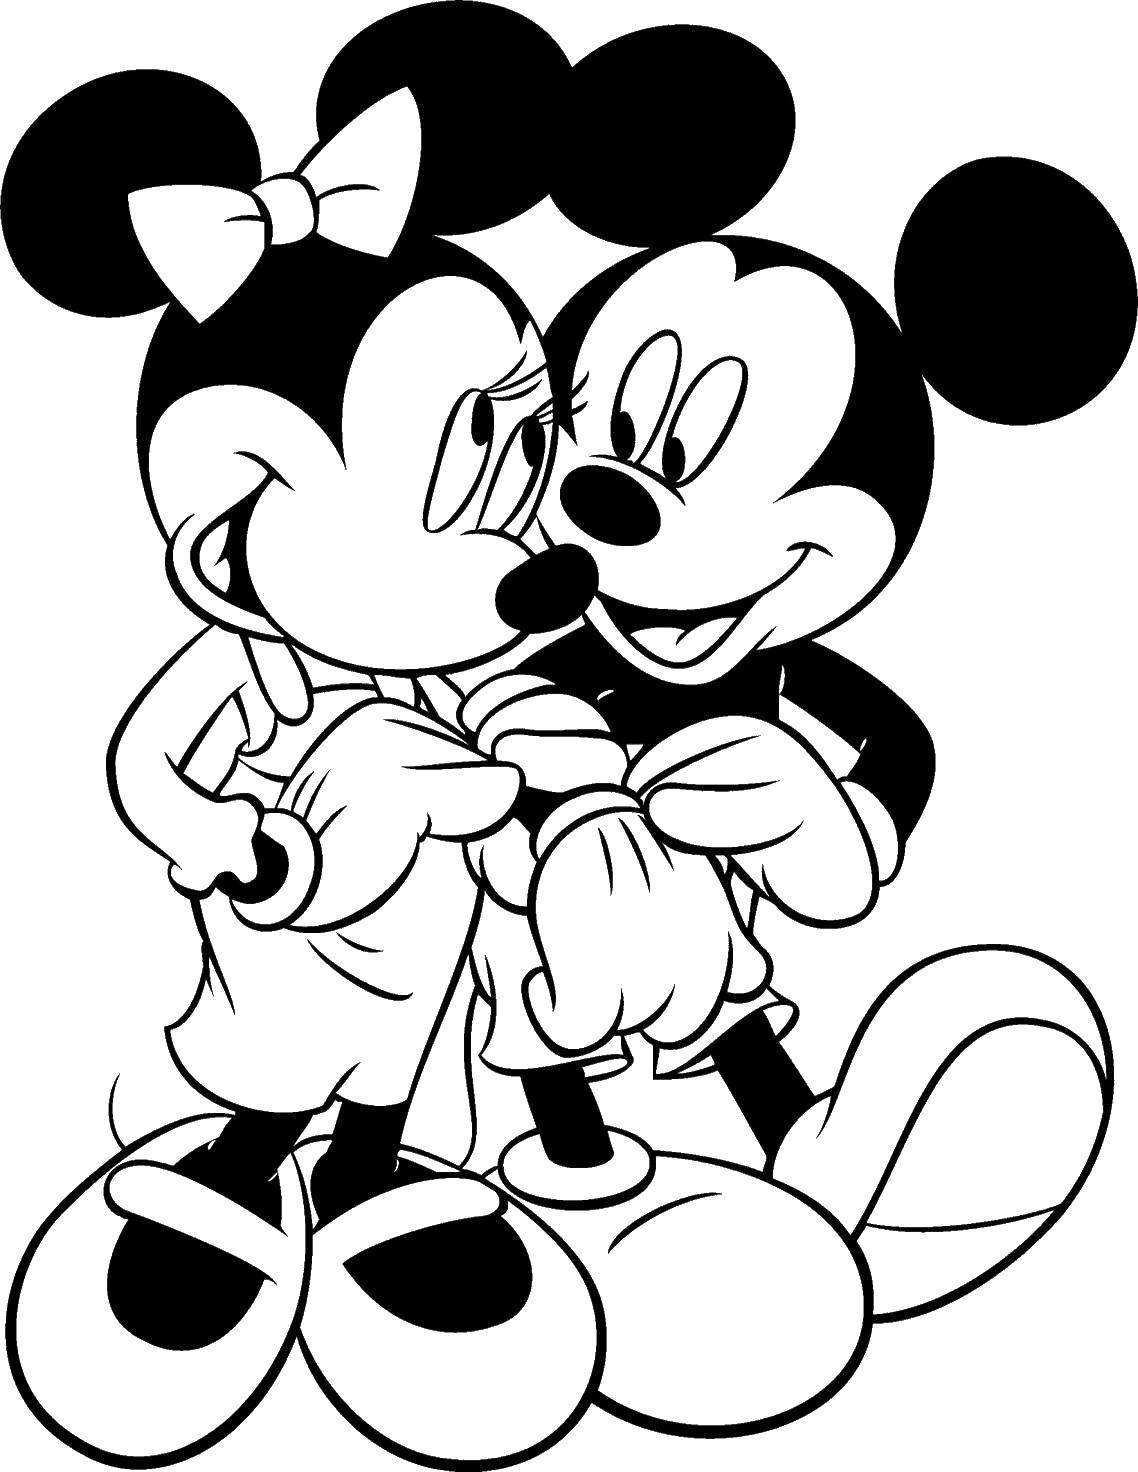 Coloring Mickey and Minnie mouse. Category Disney cartoons. Tags:  Disney, Mickey Mouse, Minnie Mouse.